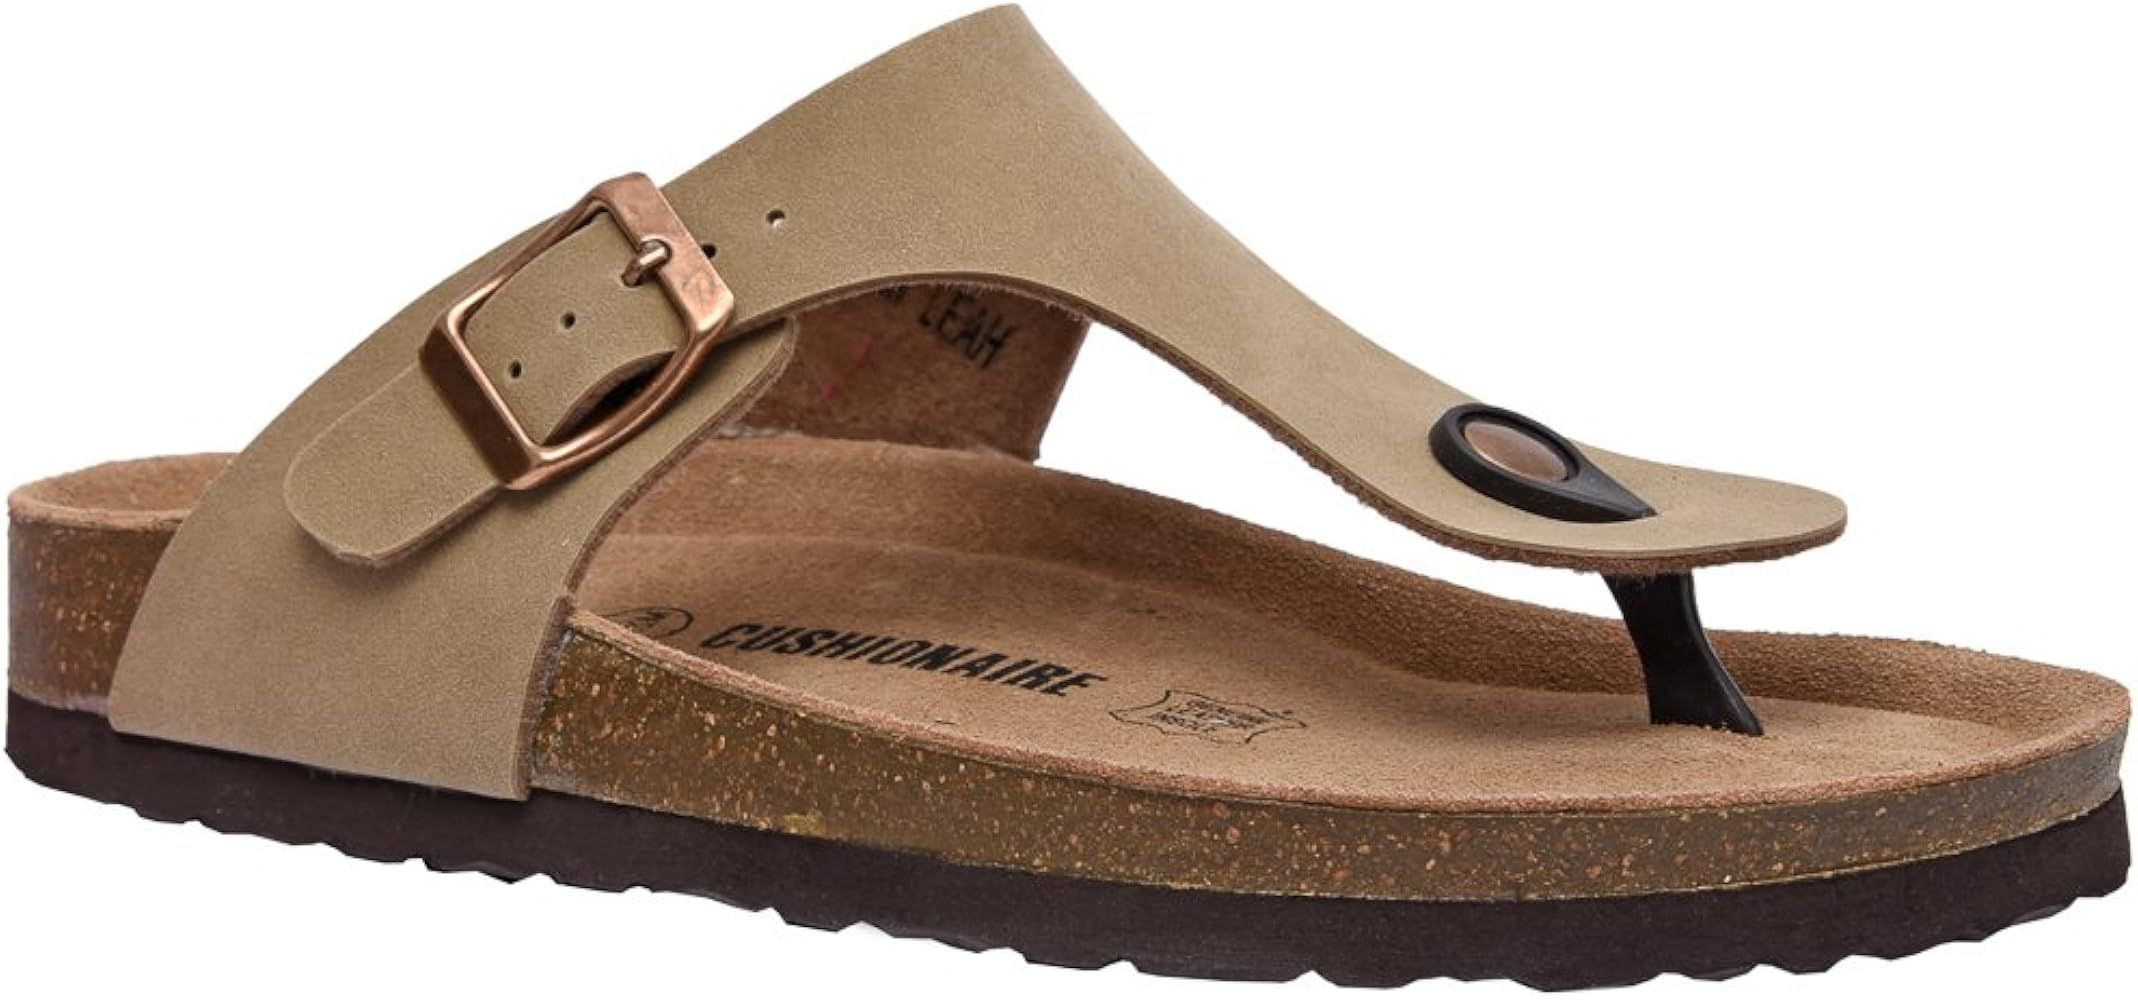 CUSHIONAIRE Women's Leah Cork footbed Sandal with +Comfort | Amazon (US)